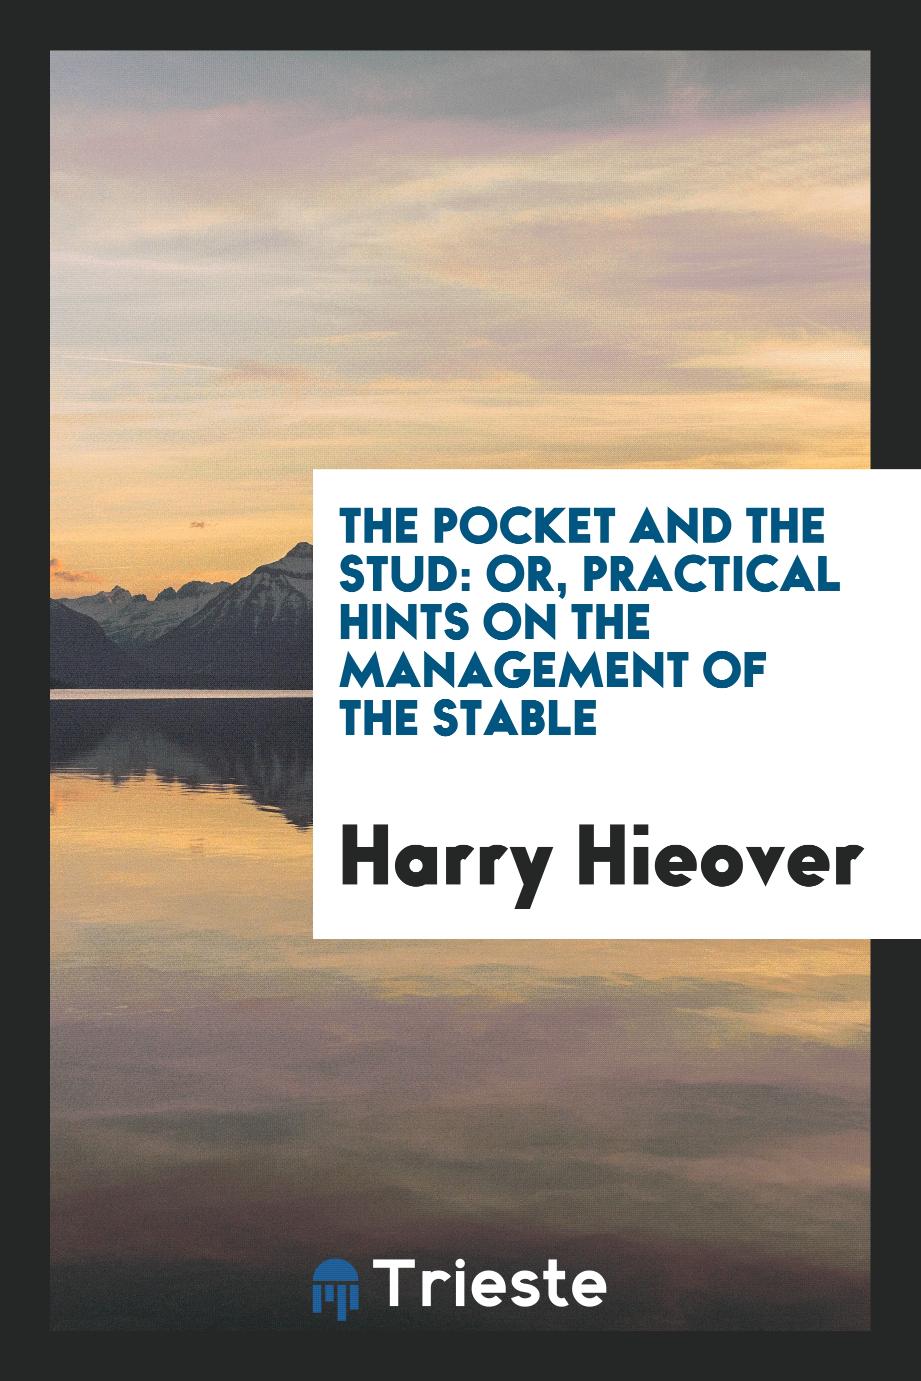 The pocket and the stud: or, Practical hints on the management of the stable